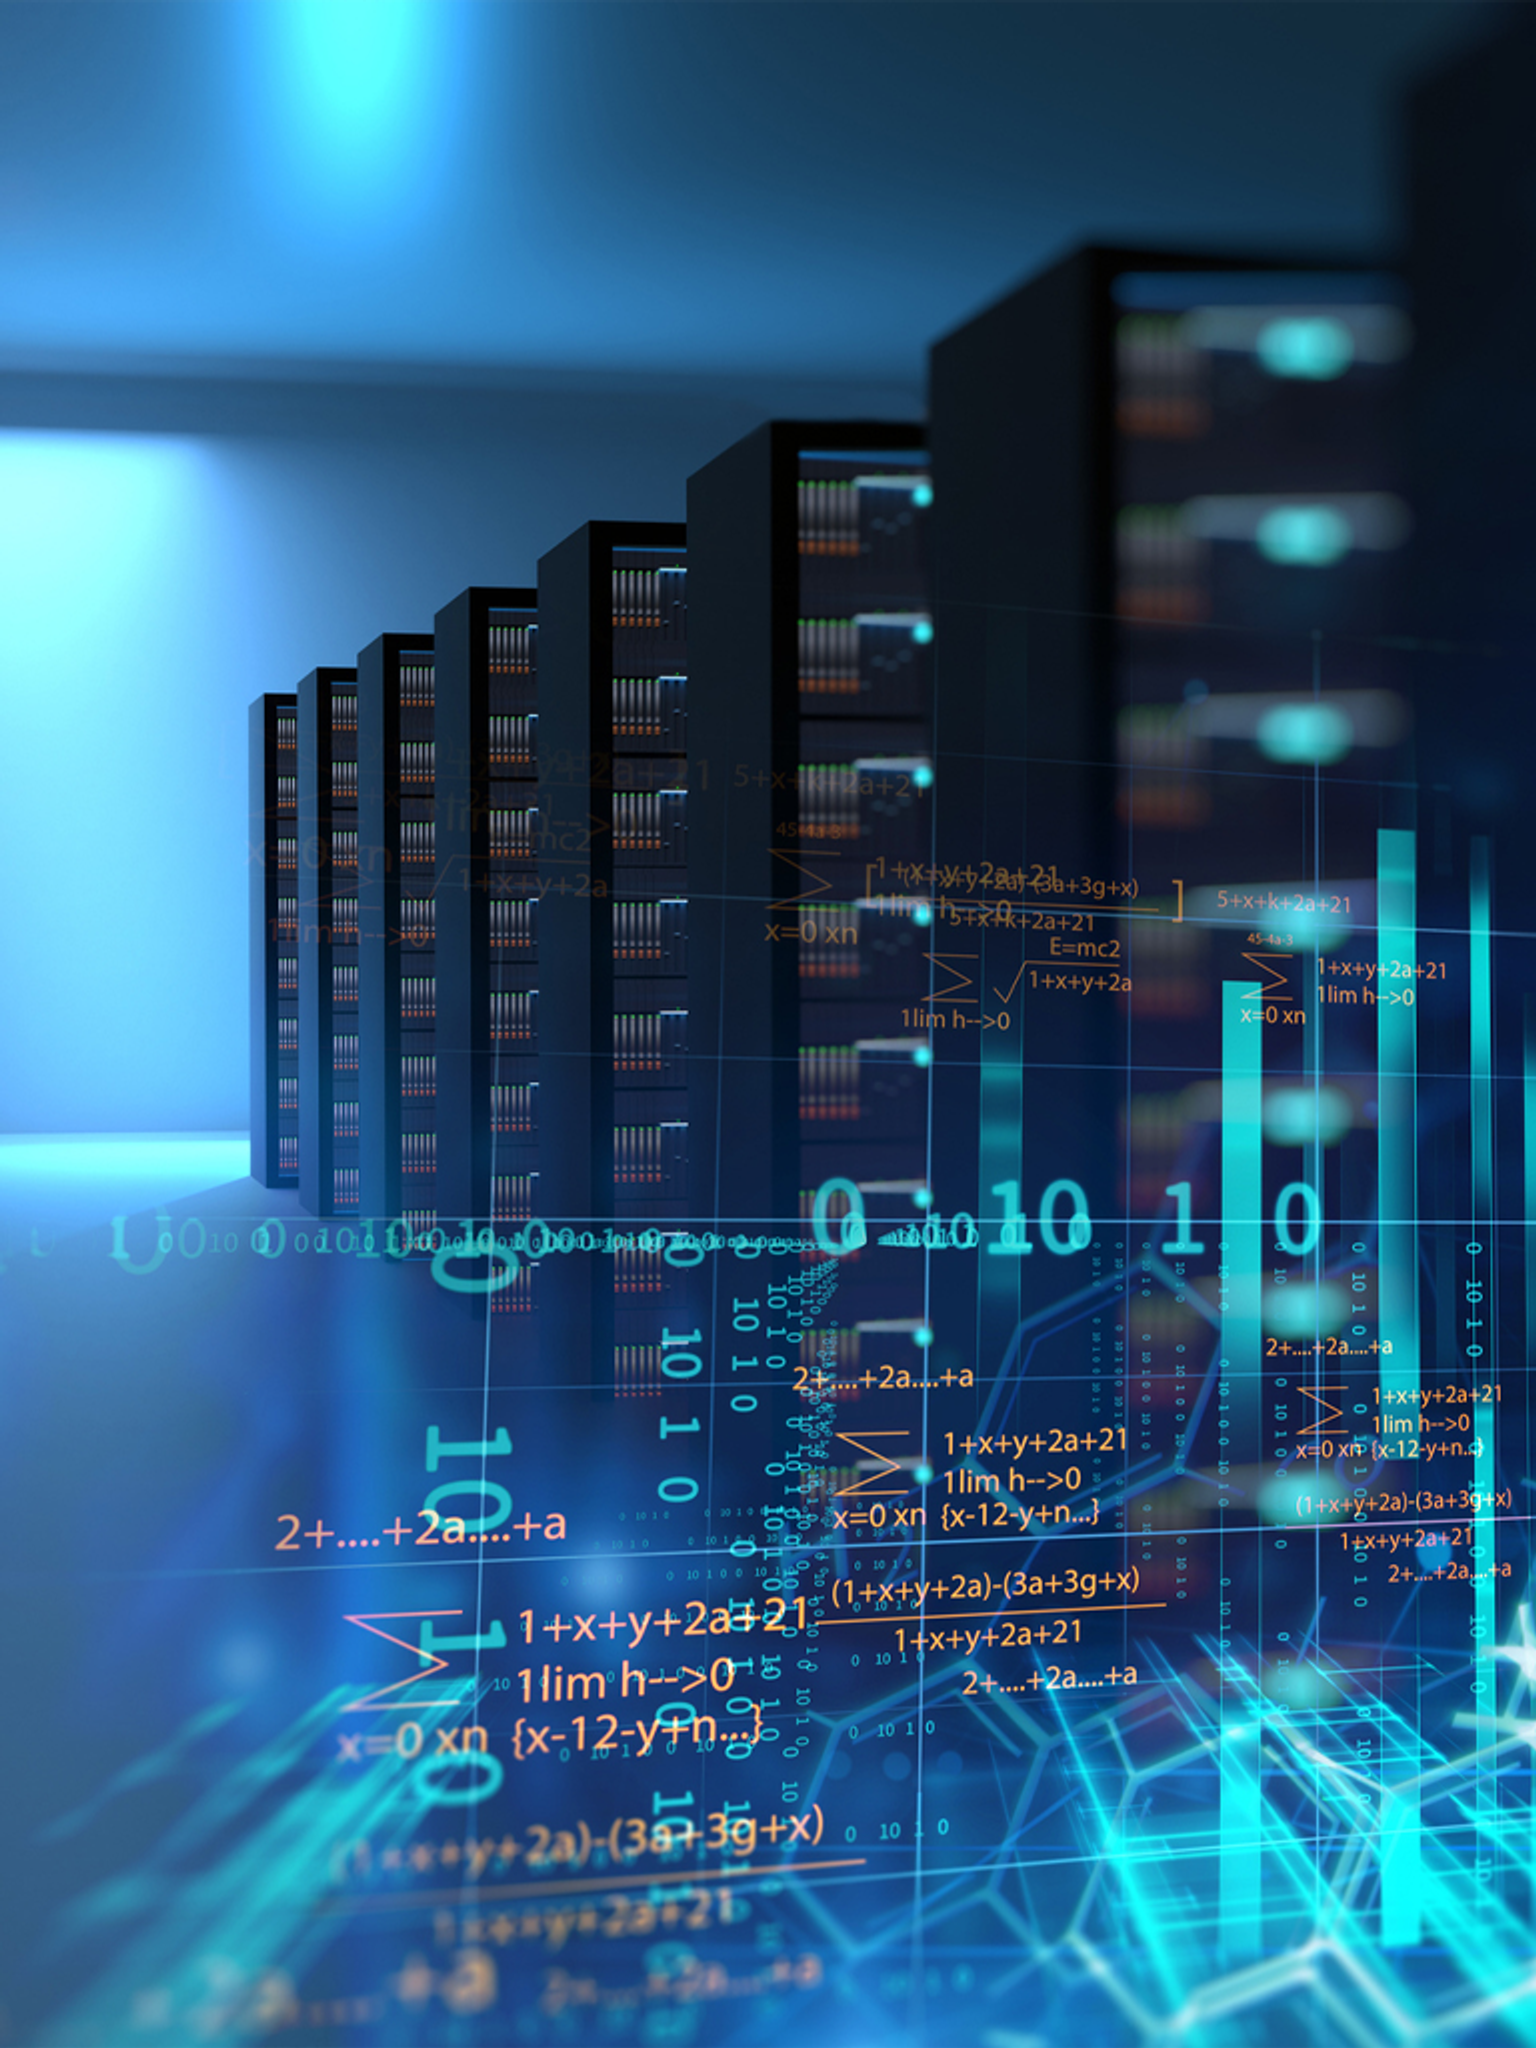 A digital illustration of server racks with floating mathematical and binary code overlay in a blue-lit data center room.